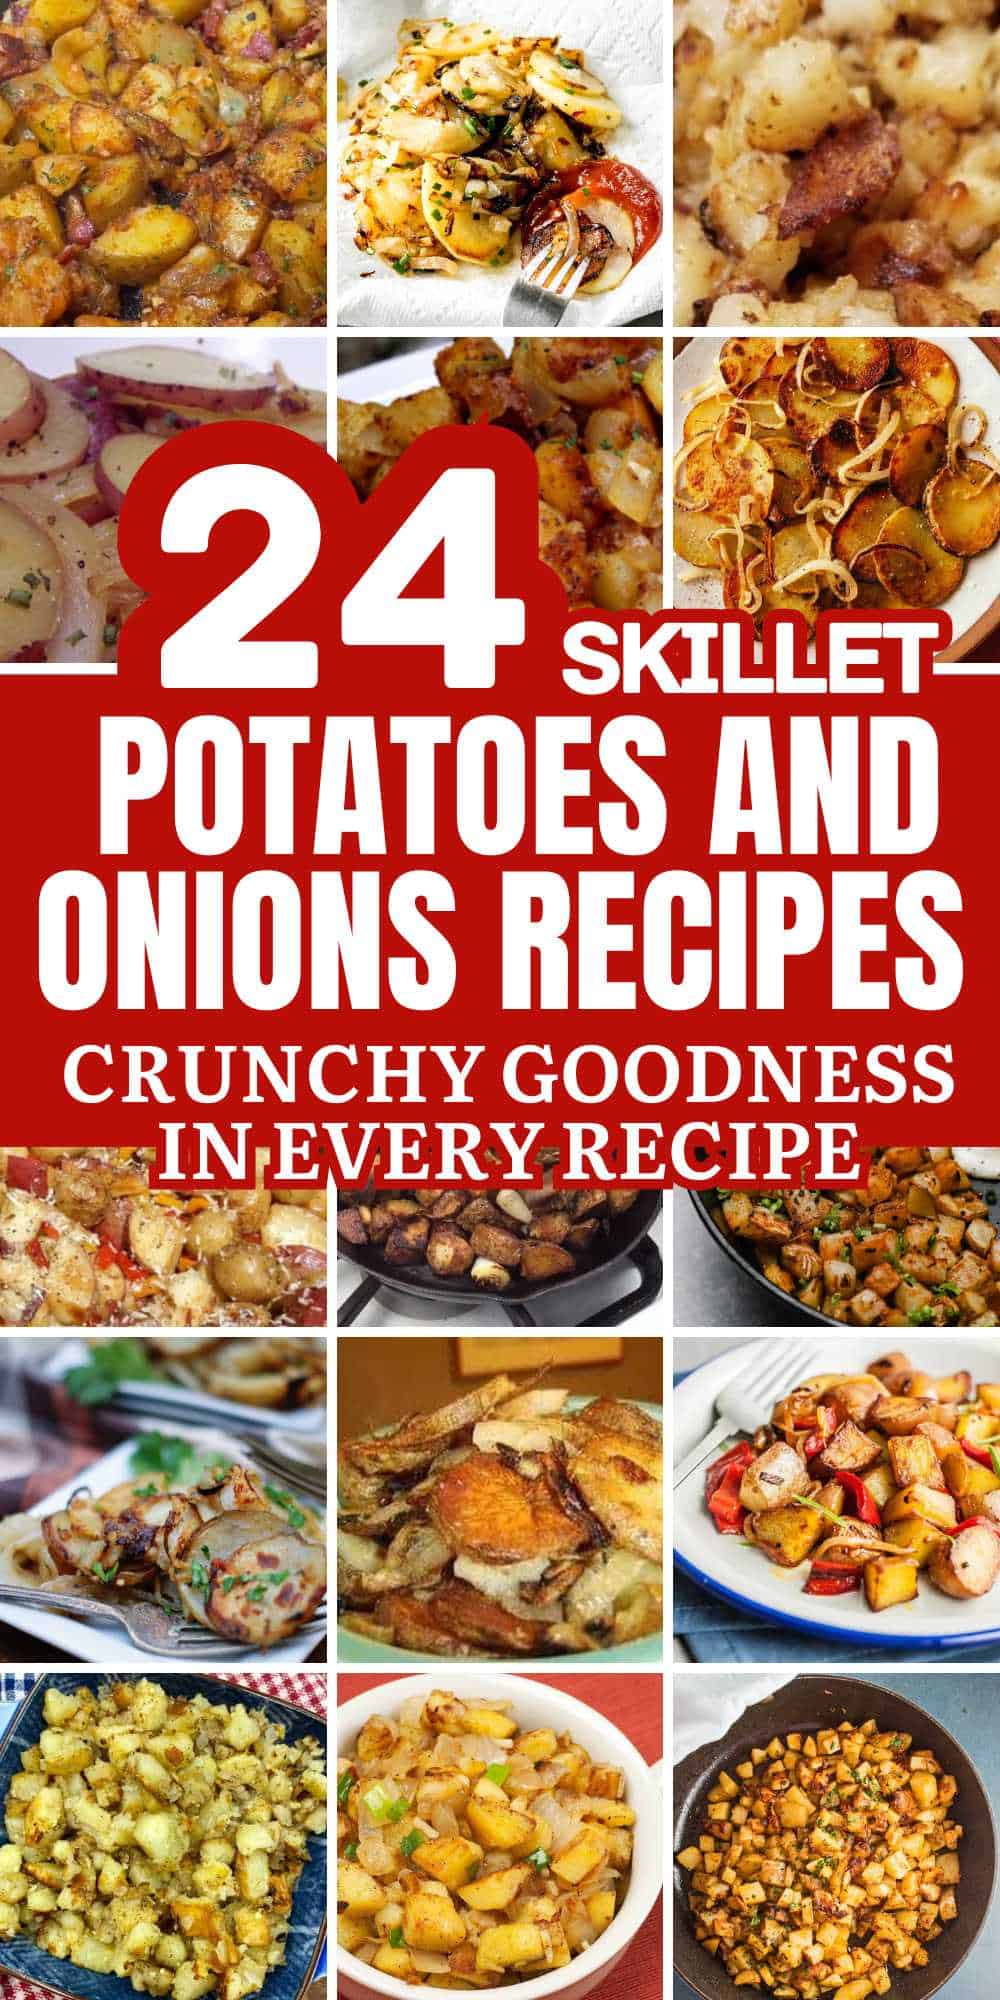 Skillet Potatoes and Onions